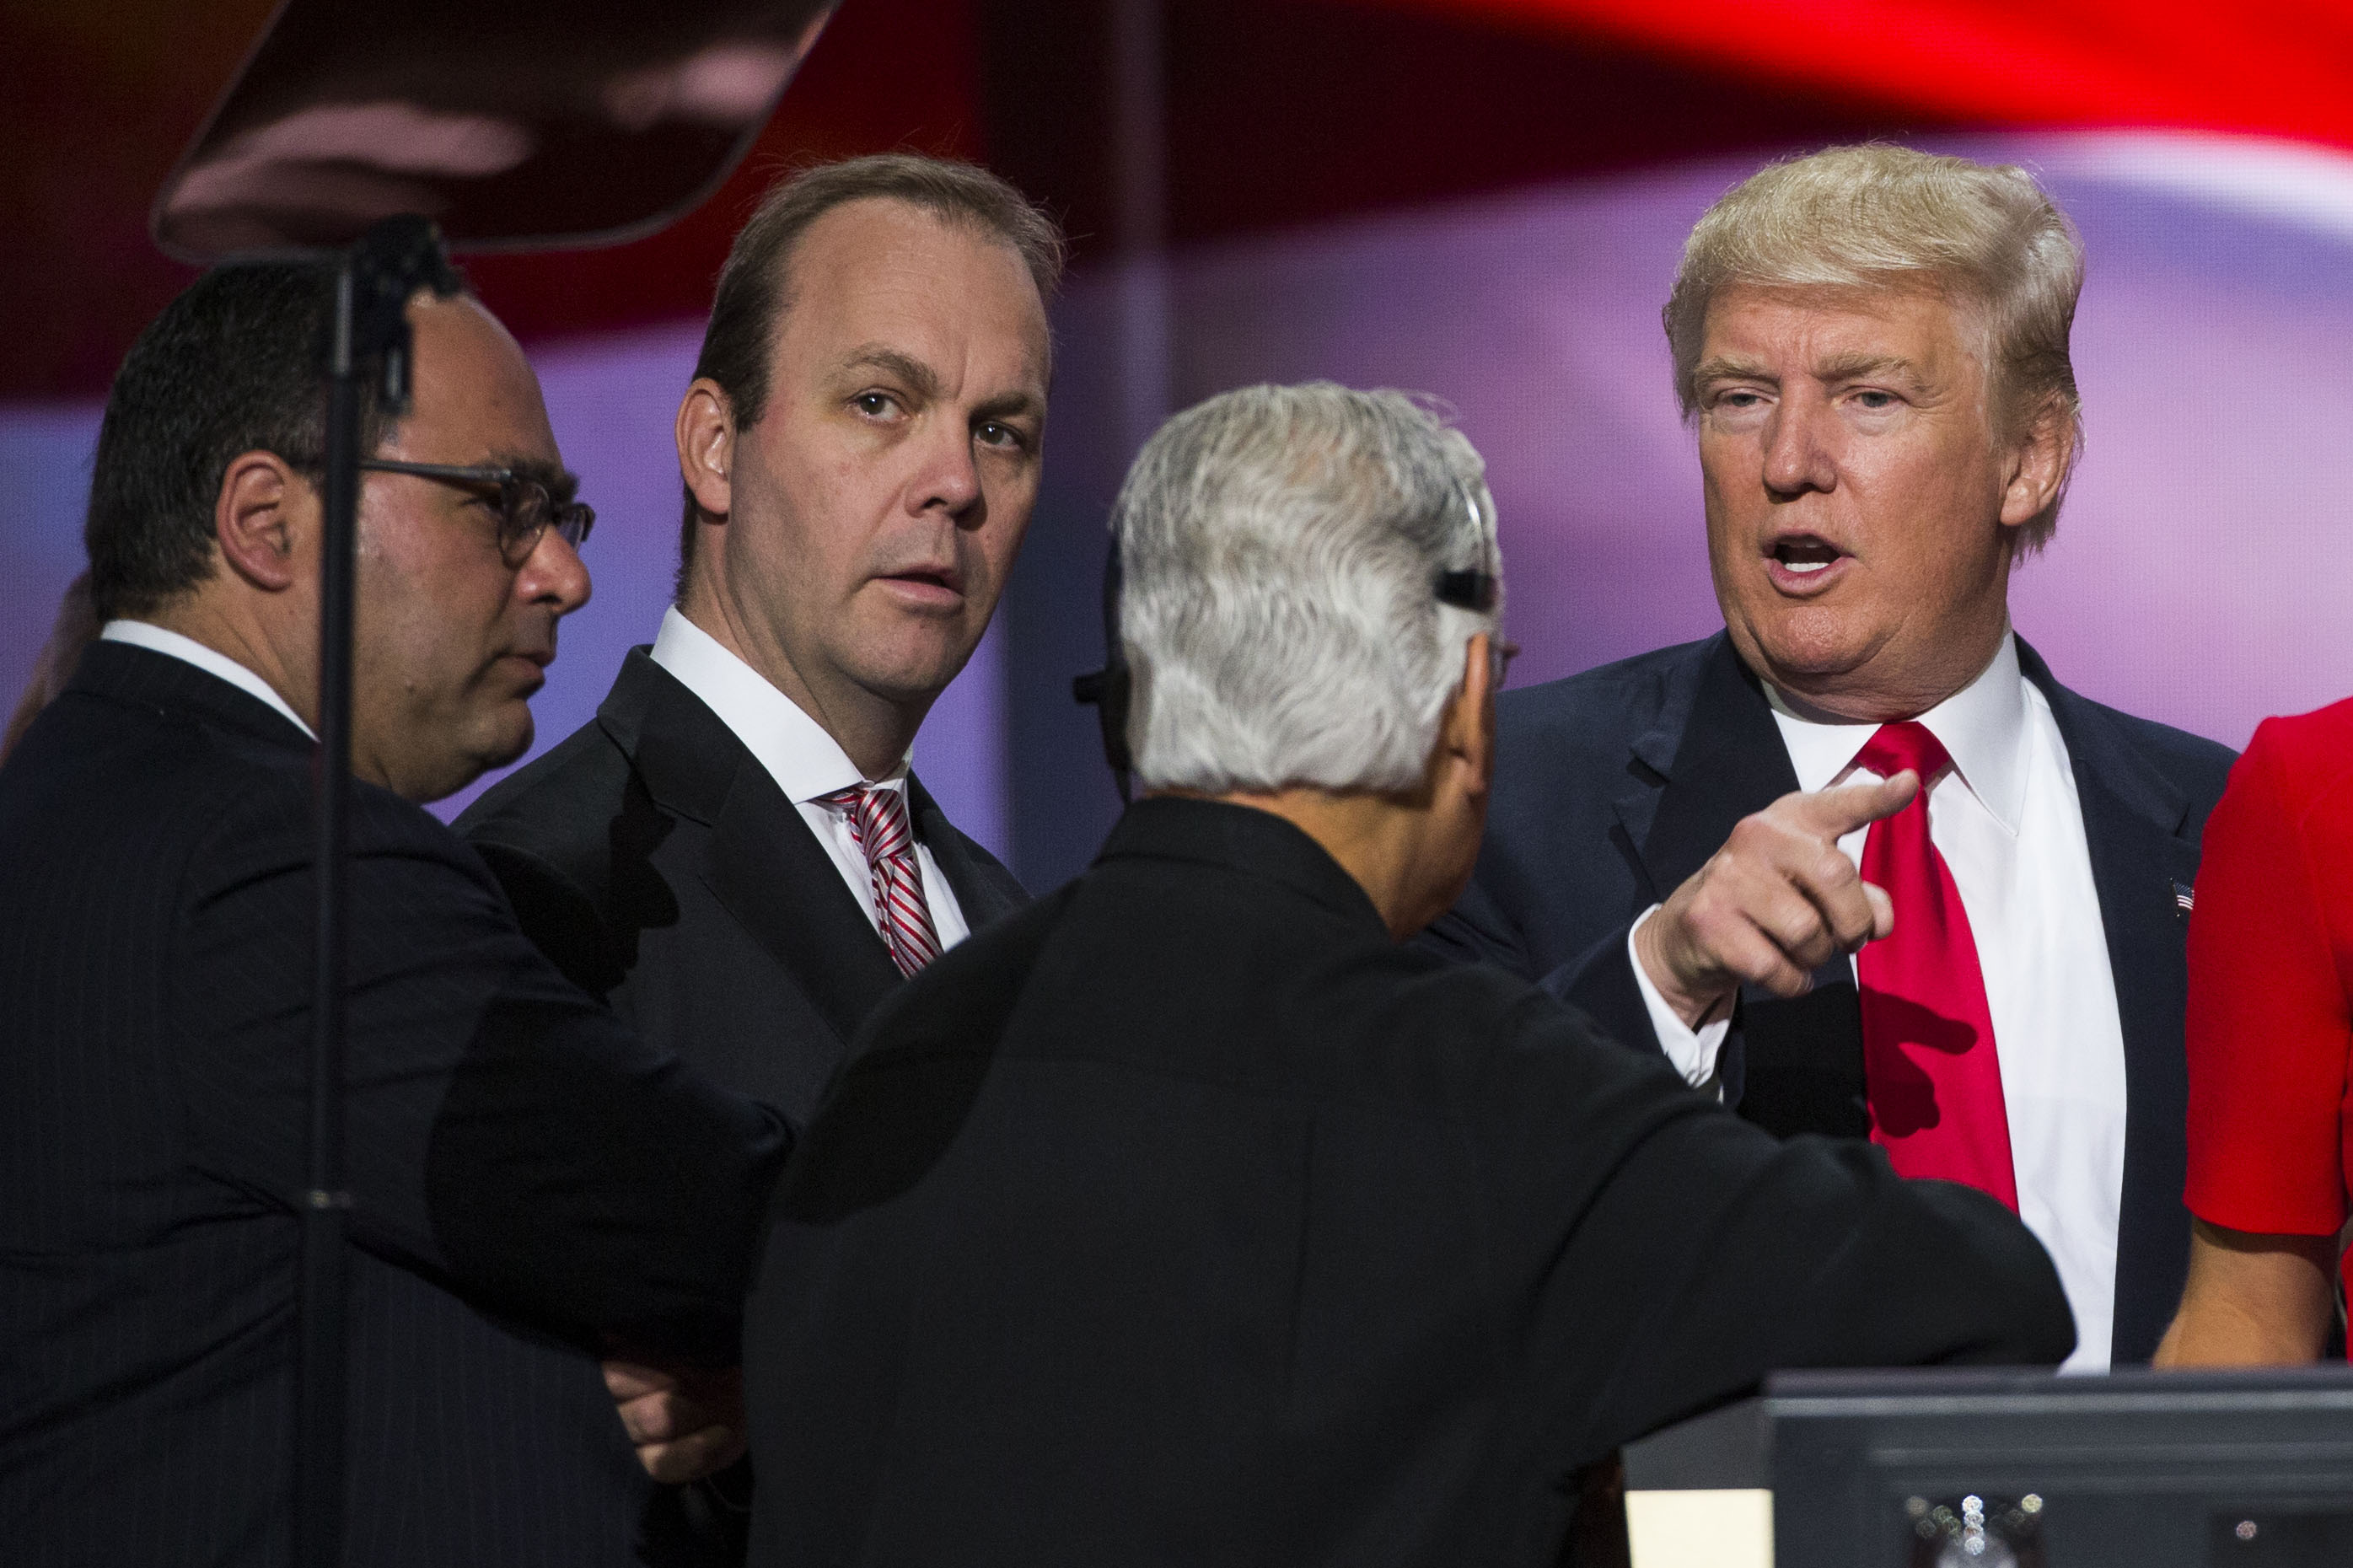 Republican nominee Donald Trump speaks with Rick Gates at the Republican Convention, July 21, 2016 at the Quicken Loans Arena in Cleveland. (Brooks Kraft—Getty Images)